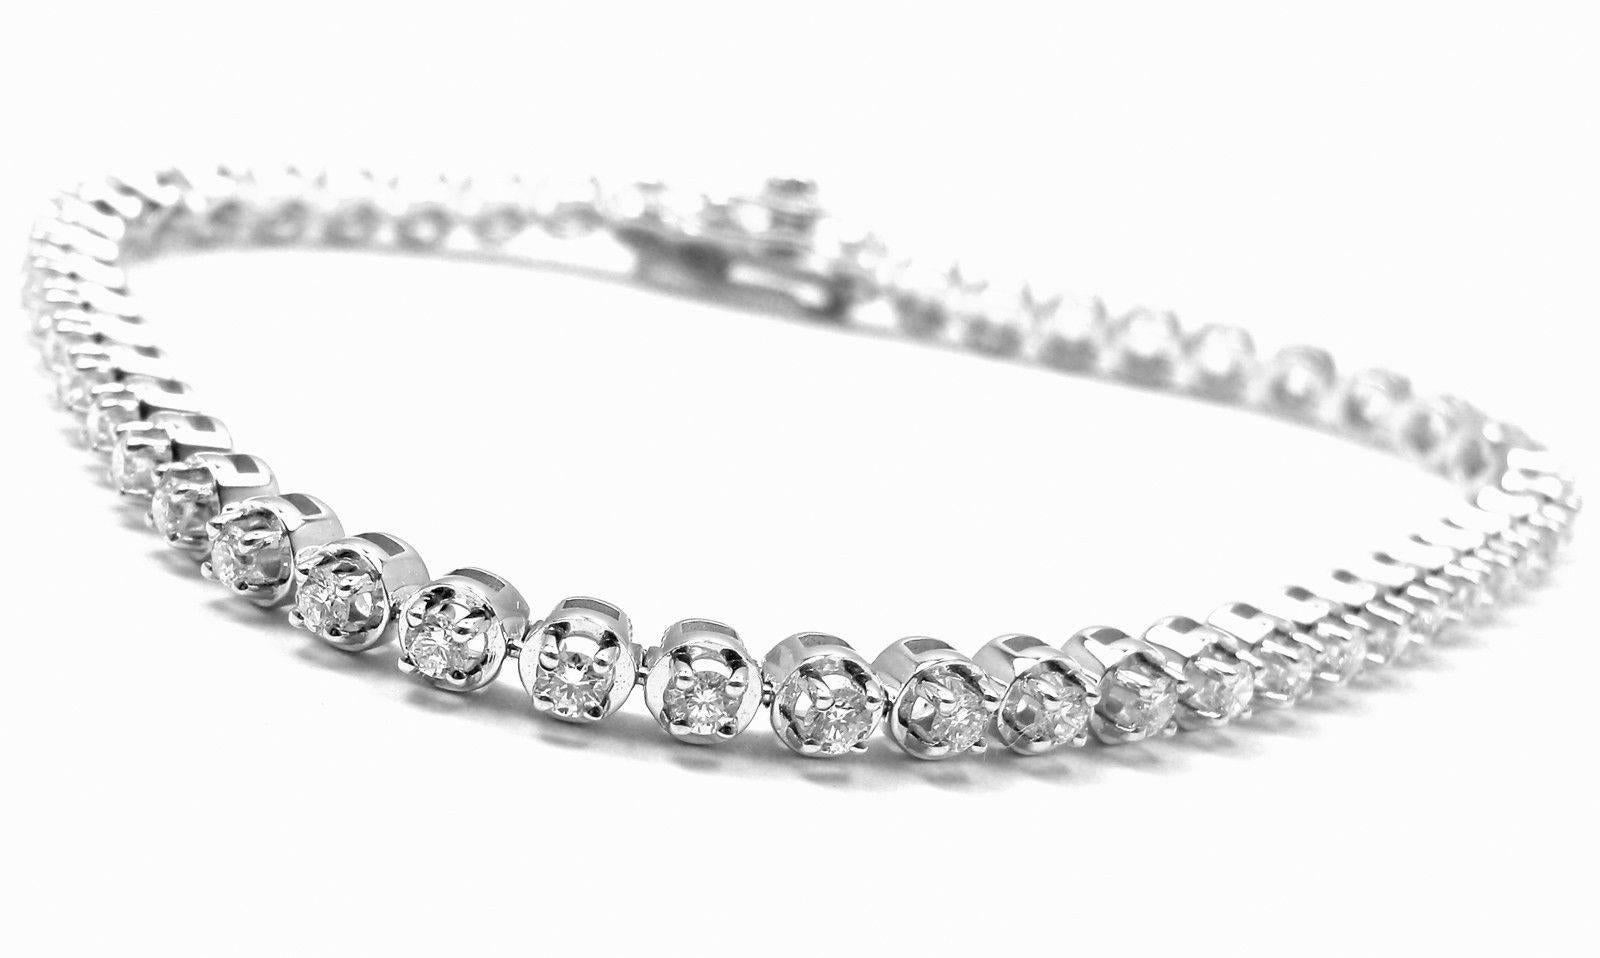 18k White Gold Minou Diamond Tennis Bracelet by Damiani.
With round brilliant cut diamonds VS1 clarity, G color total weight approx. 1.715ct
This necklace comes with Box, Certificate.

Details:
Measurements: Length: 7.25"
Width: 